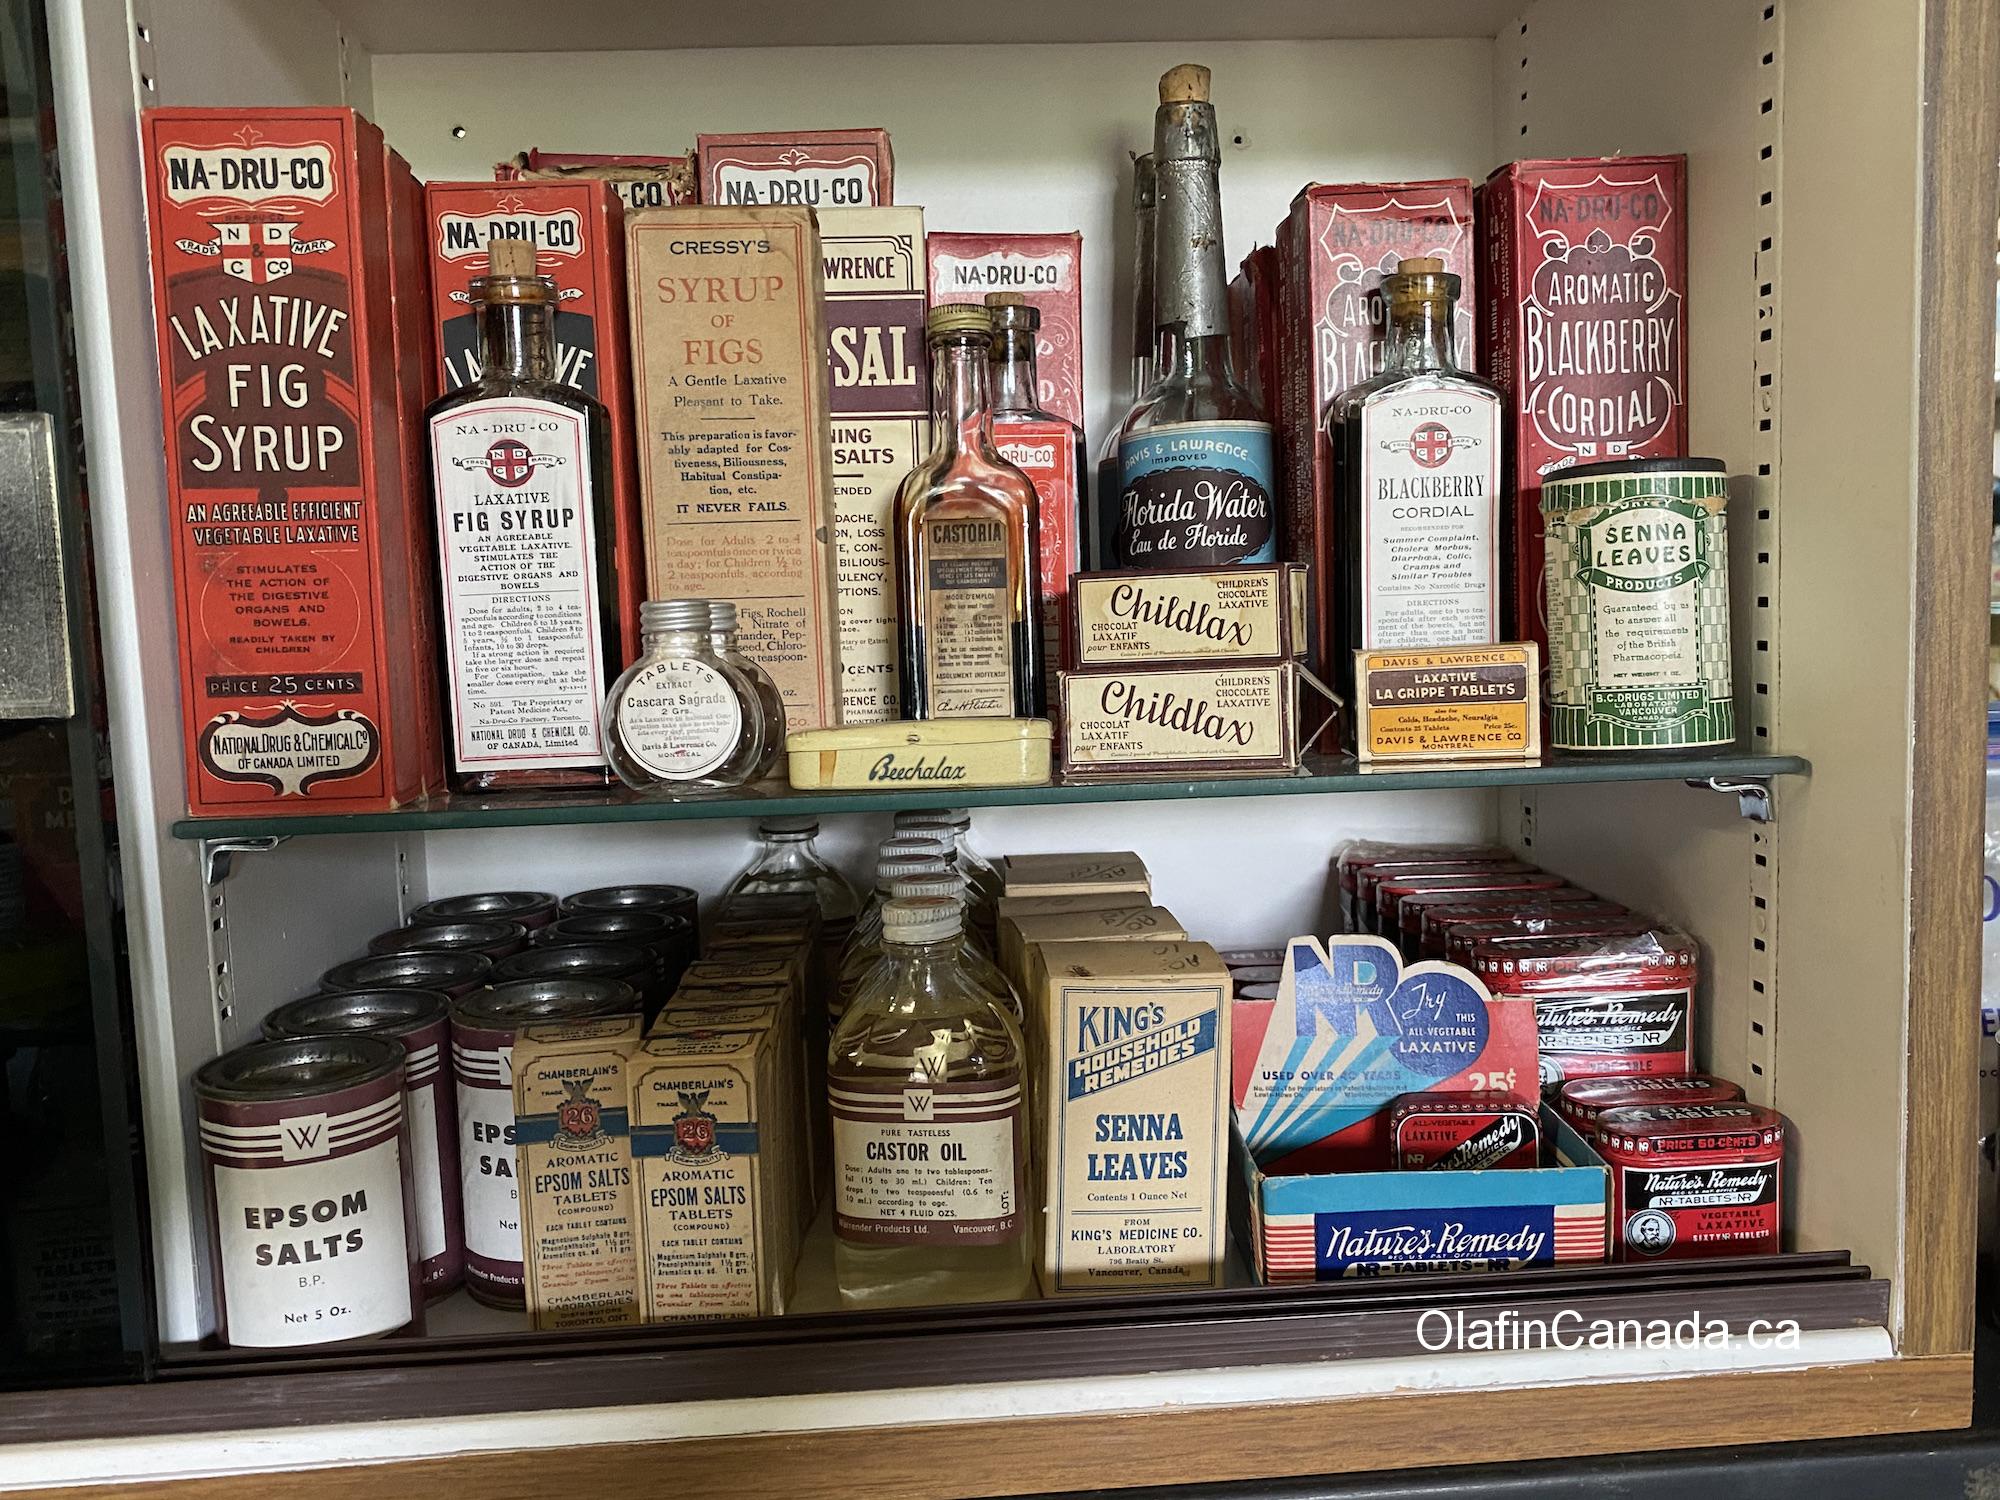 Pharma products at the General Store in 153 Mile House #olafincanada #britishcolumbia #discoverbc #abandonedbc #153milehouse #generalstore #backintime